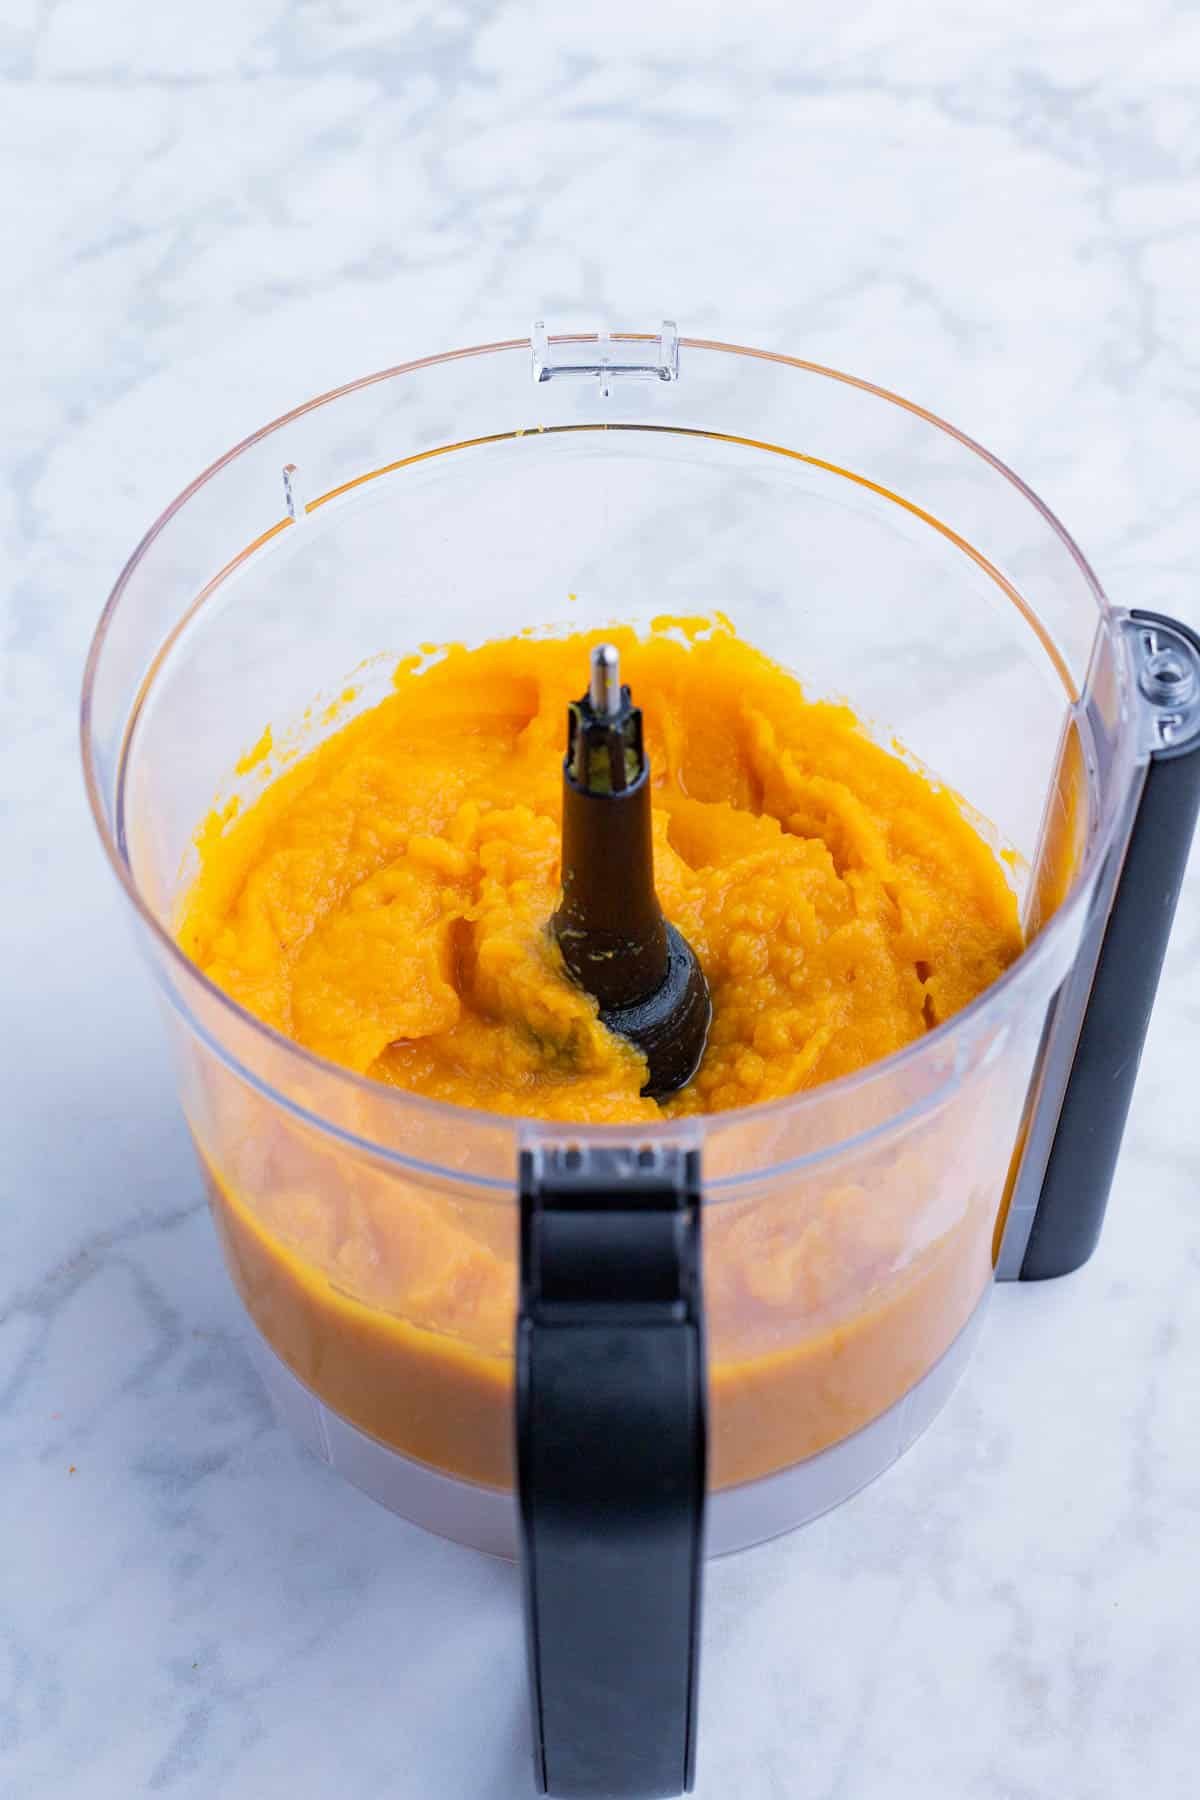 The roasted squash is pureed in a food processor.